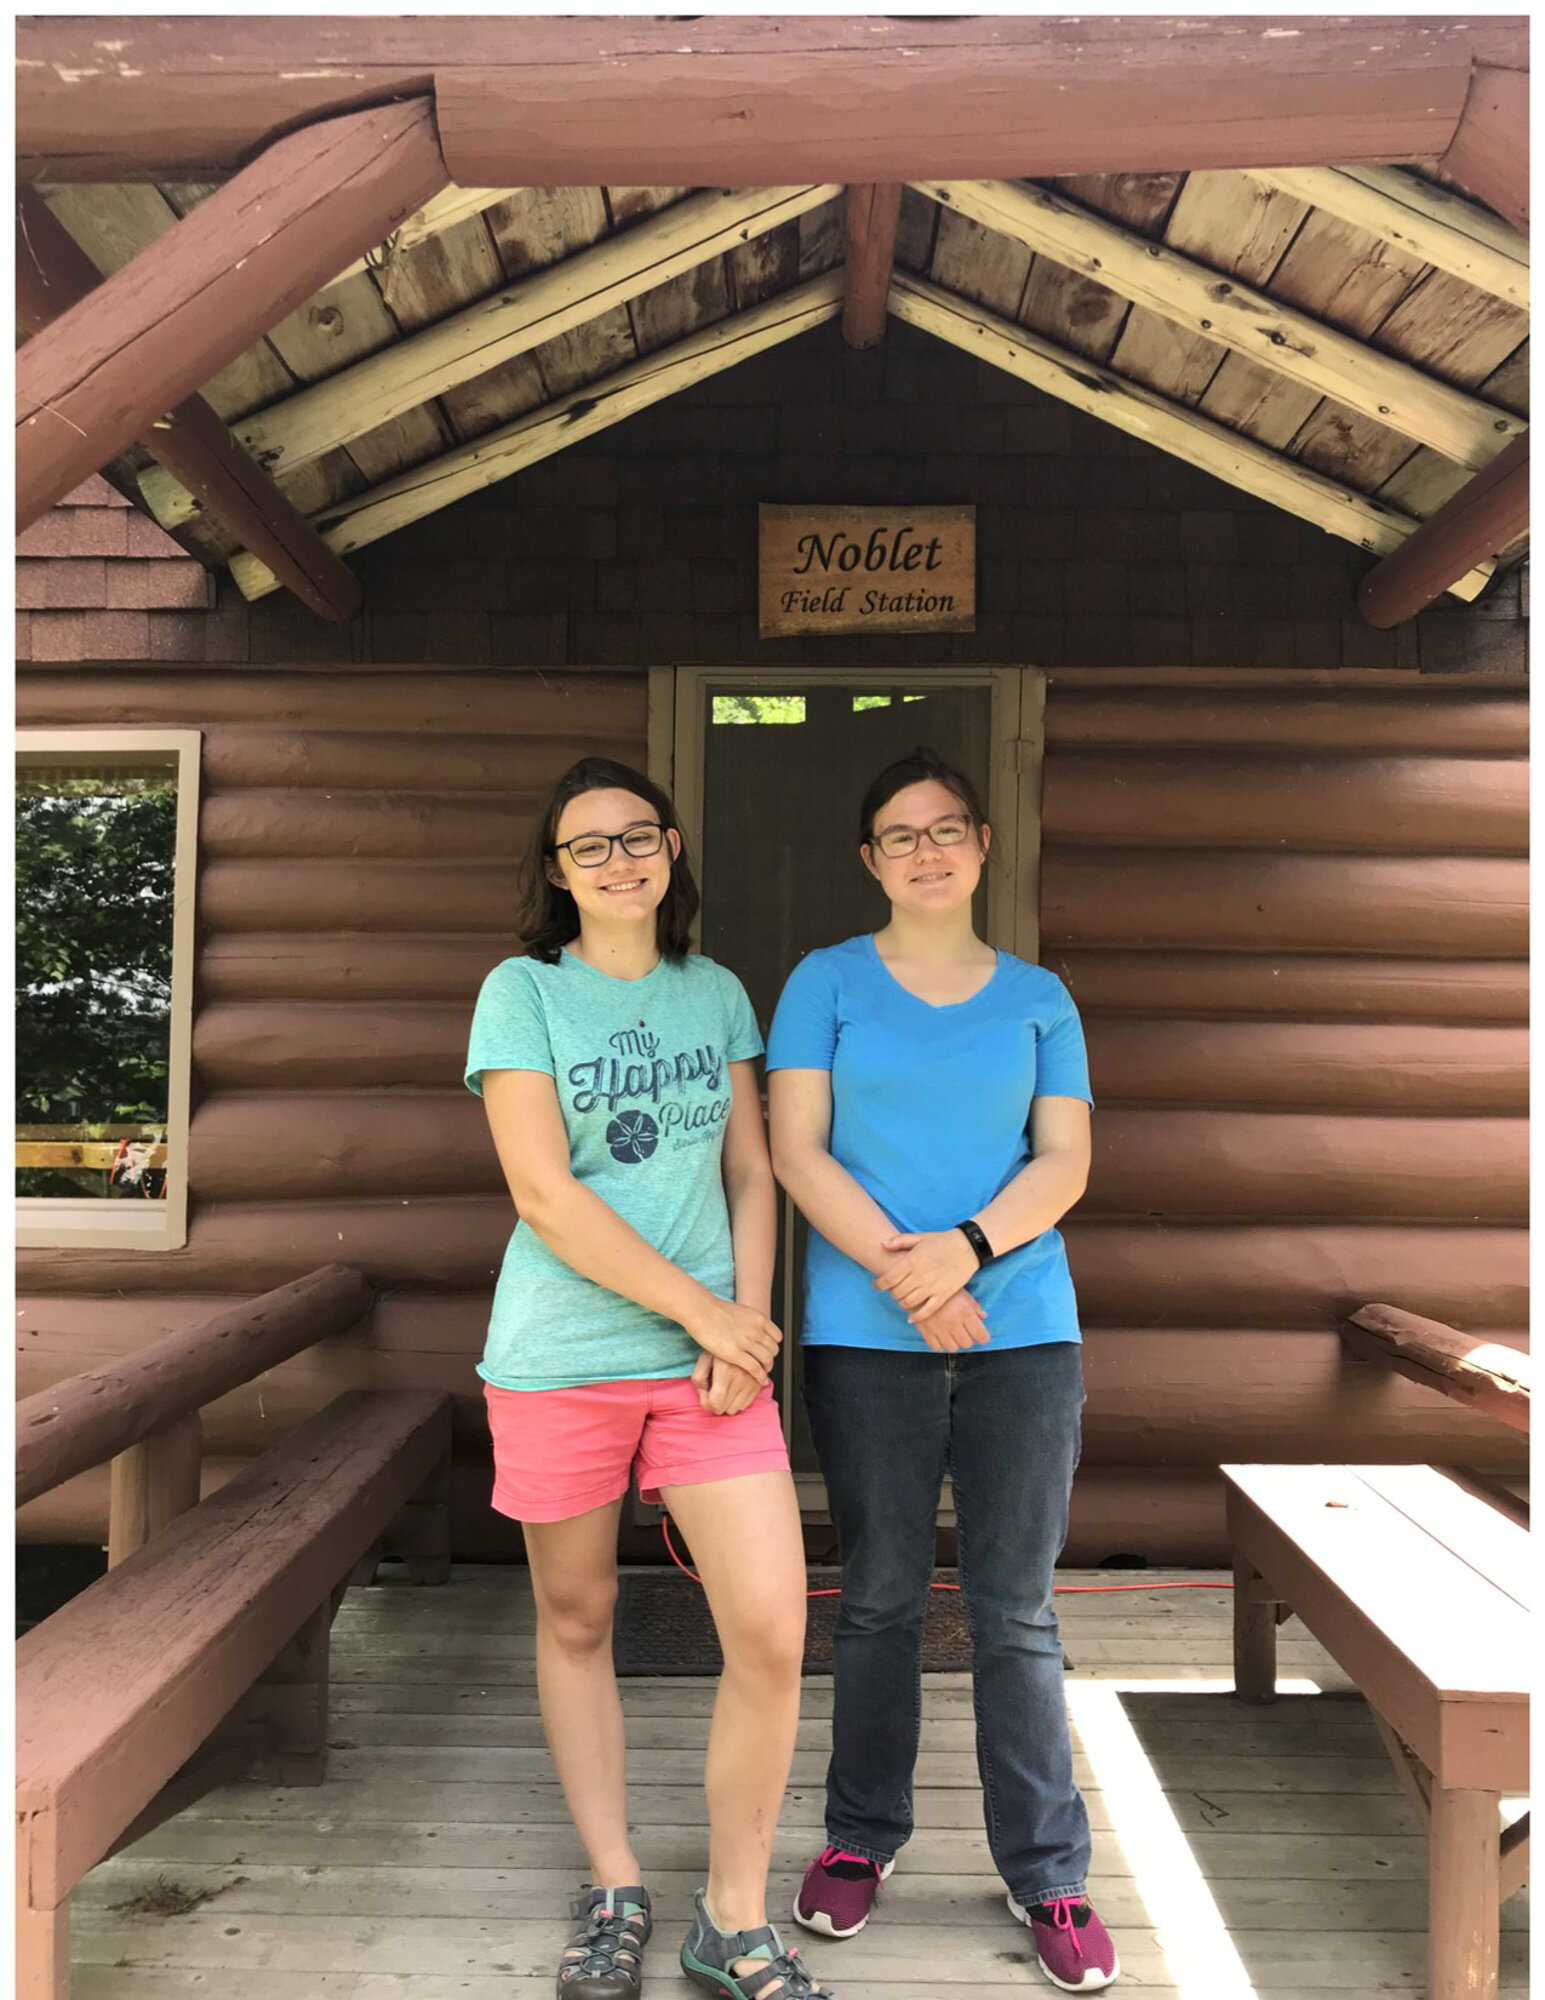   GLC provides a scholarship with preference for local students to attend Tech’s Aquatic Ecology program at Gratiot Lake. In 2019 the Jack and Rita Sandretto Scholarship was awarded to two Calumet High School juniors, Lila Frantti and Serenity Snyder